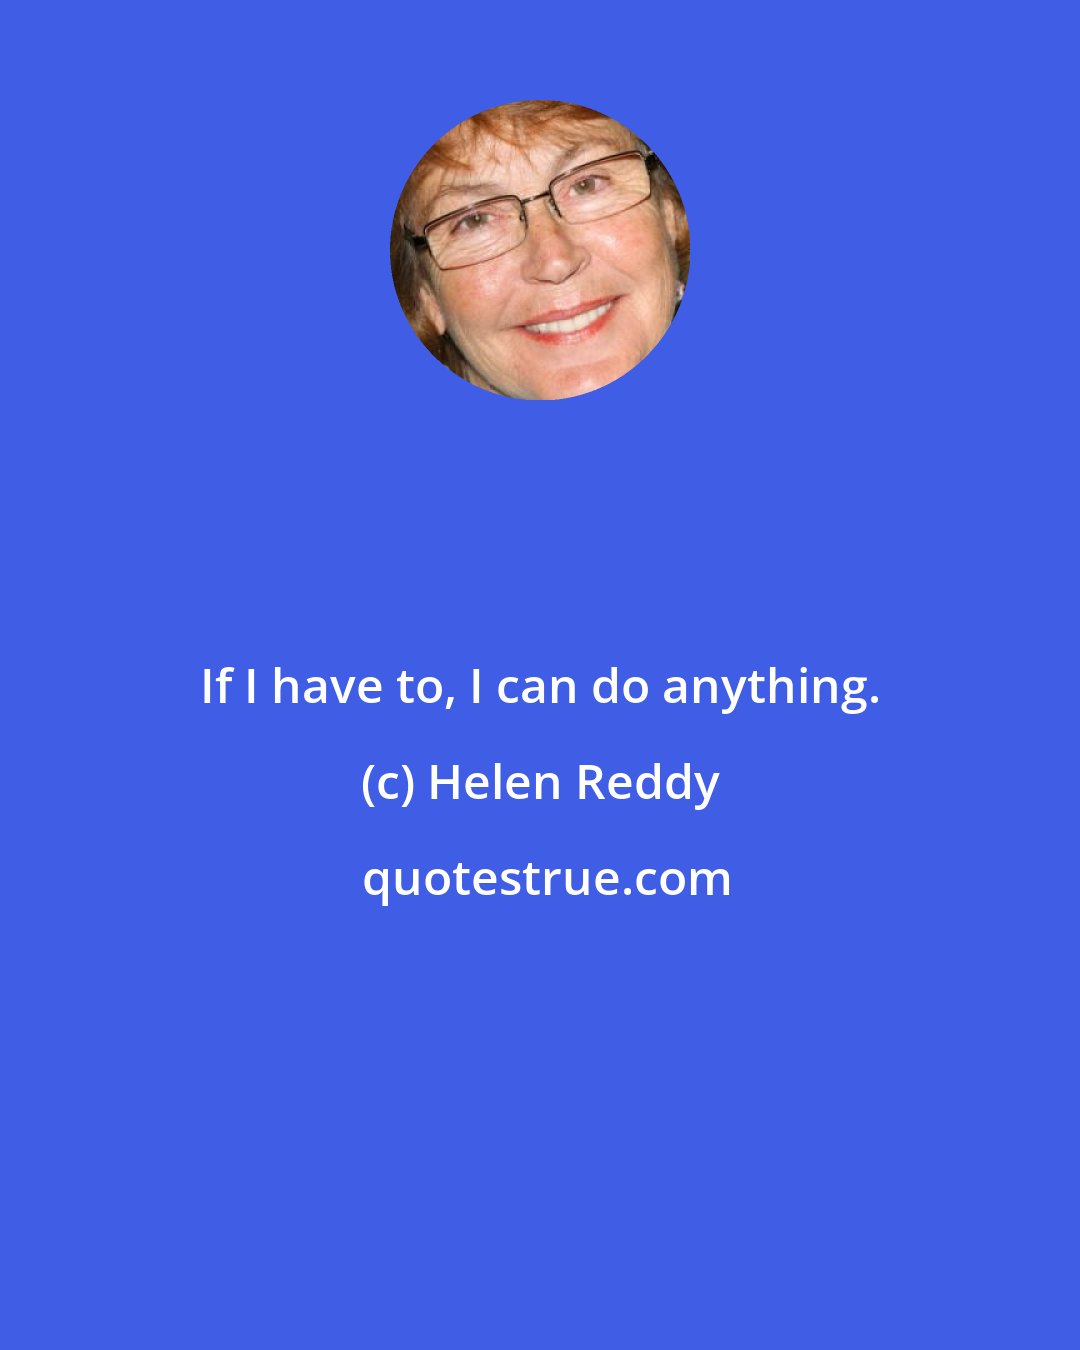 Helen Reddy: If I have to, I can do anything.